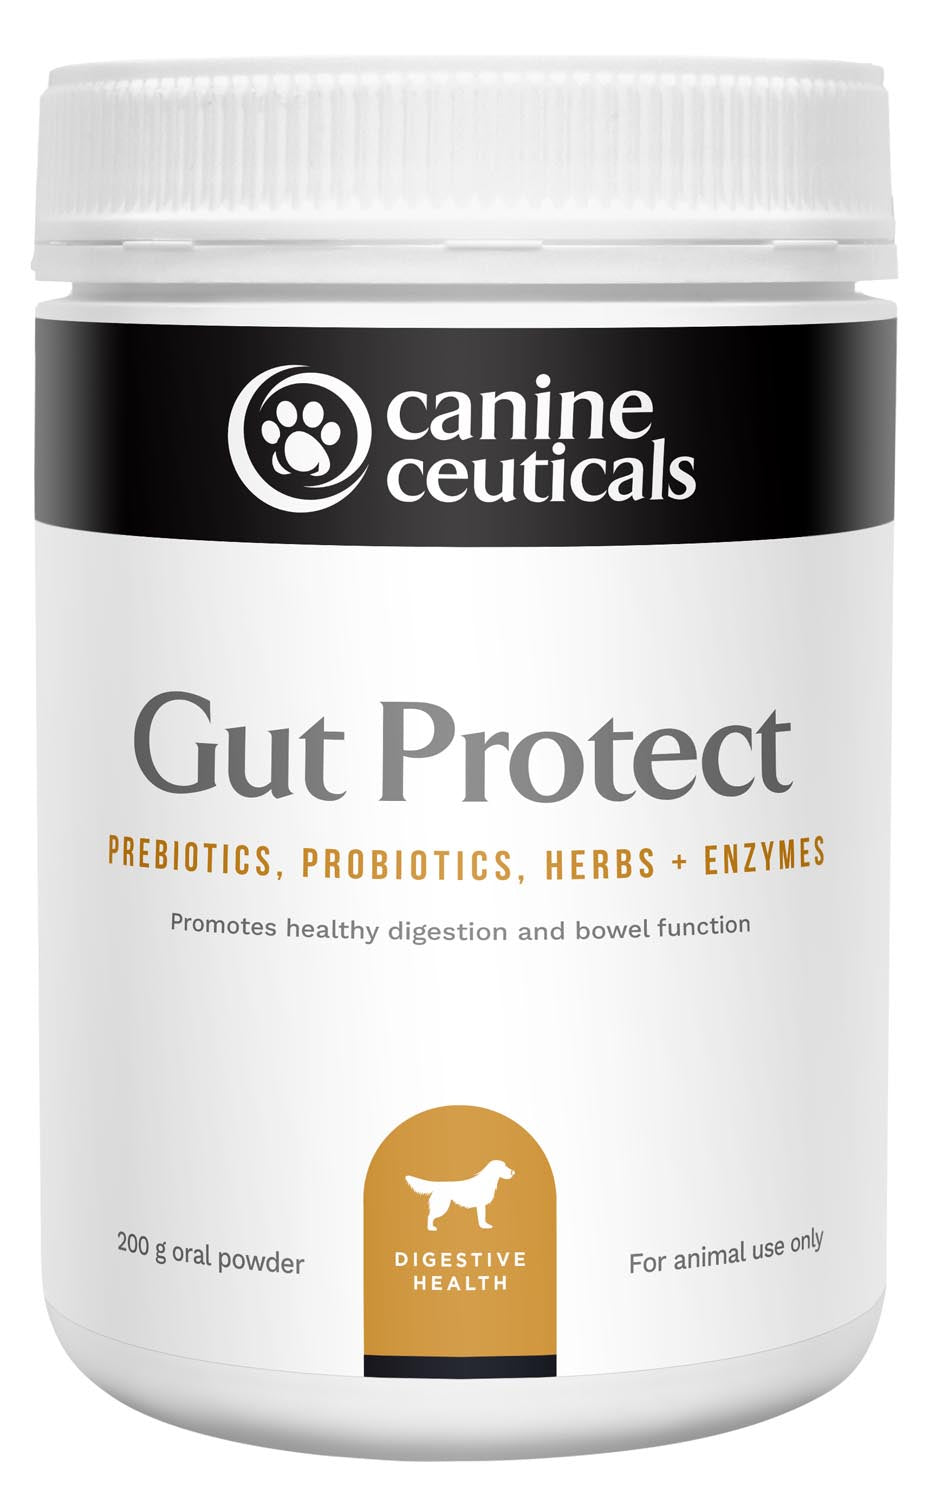 CanineCeuticals GUT PROTECT